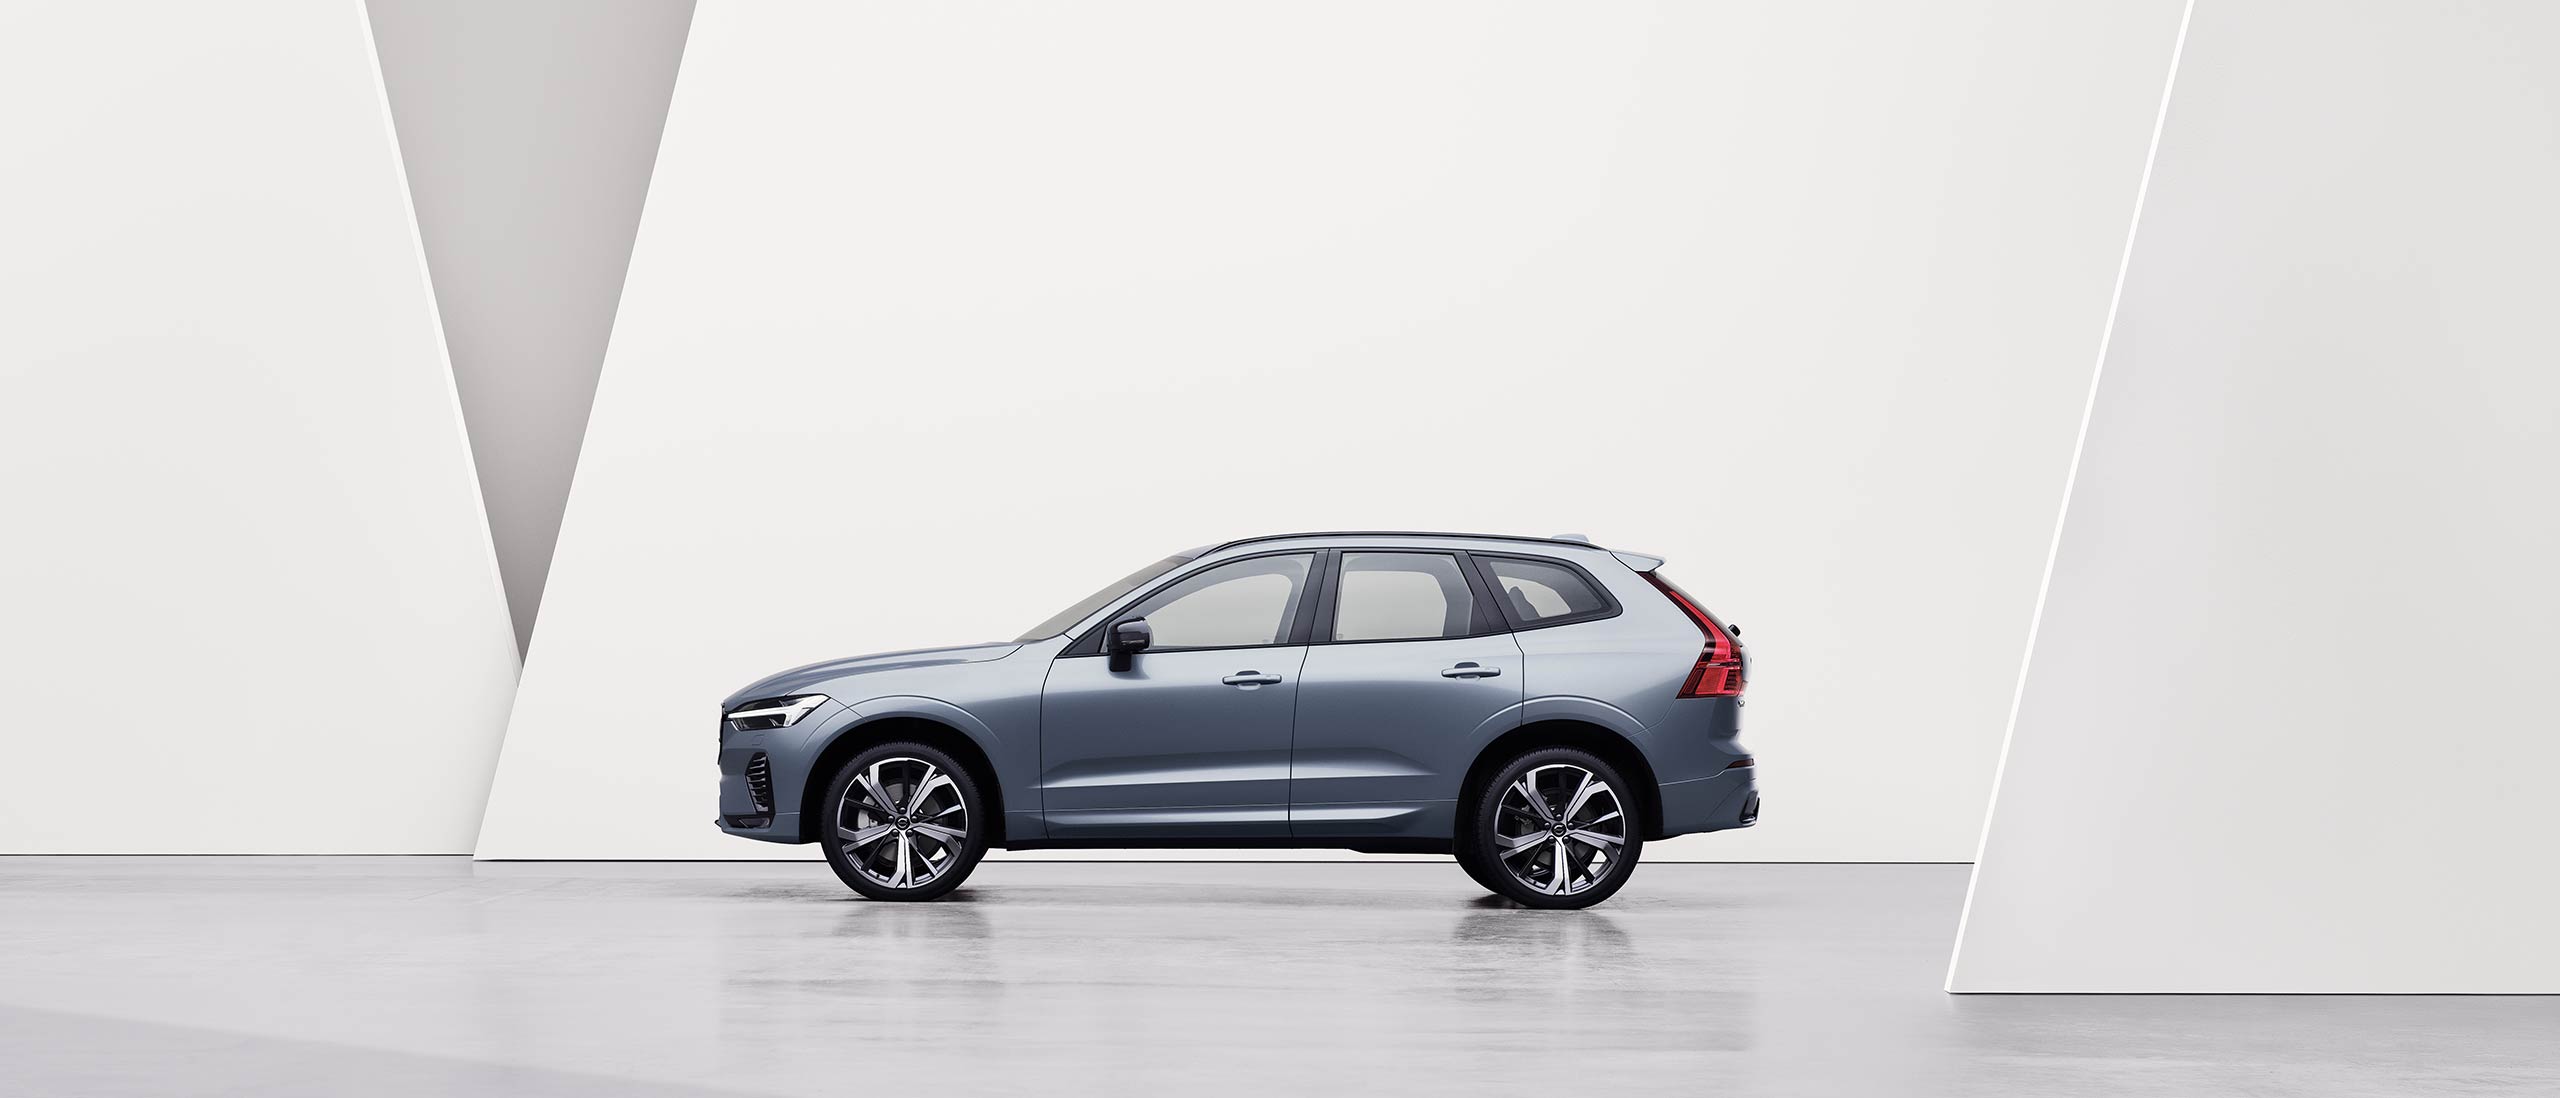 The side profile of a grey Volvo XC60 SUV.